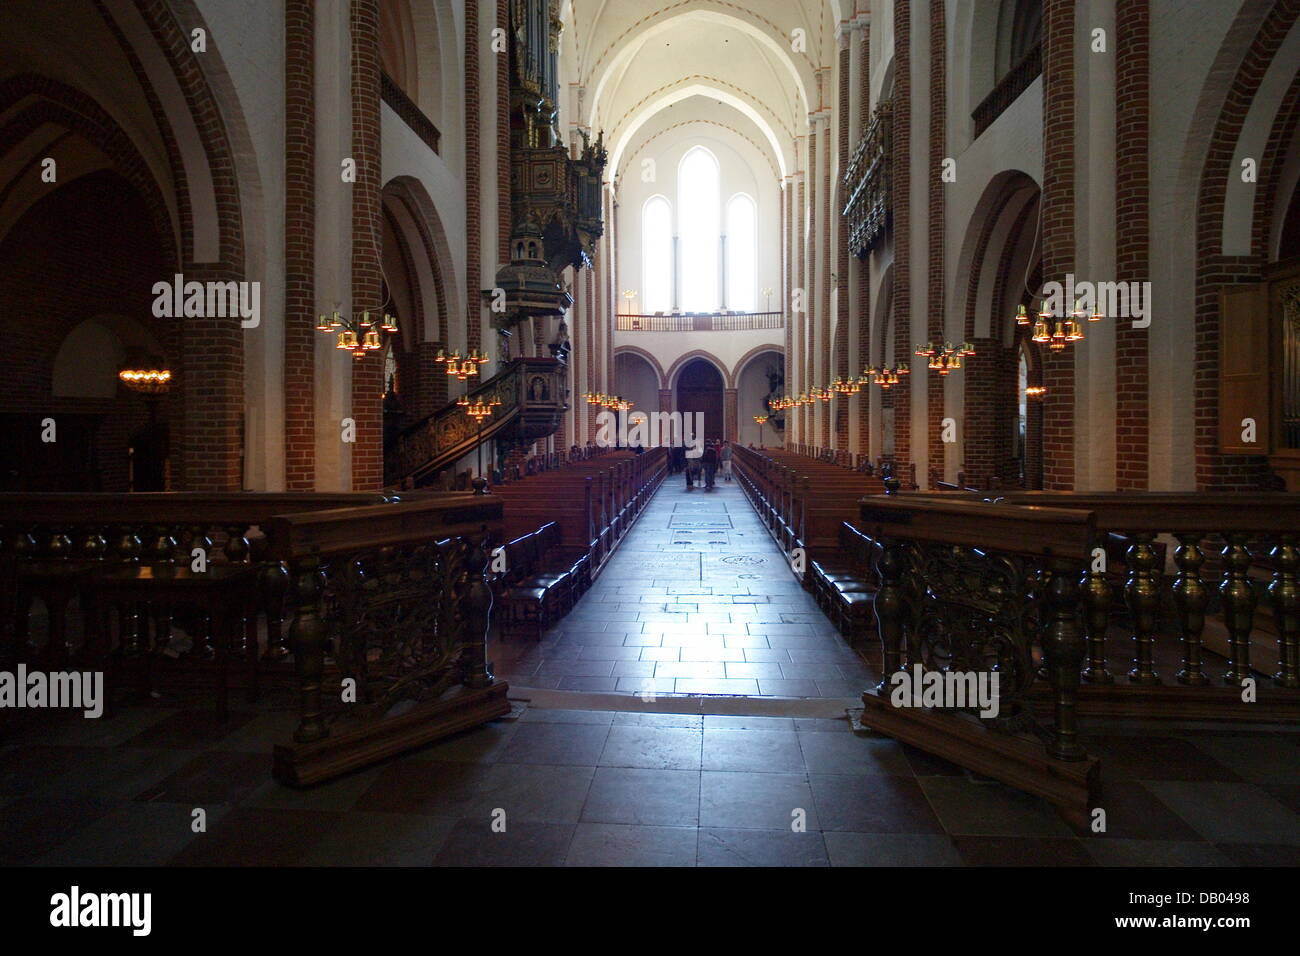 The photo shows the inside of Roskilde cathedral, Denmark, 23 May 2007. The cathedral was declared UNESCO World Cultural Heritage in 1995. Construction started in Romanic style in 1170 and was continued in Gothic style from 1200 onwards. 20 Danish kings and 17 queens are entombed at the cathedral. Photo: Maurizio Gambarini Stock Photo